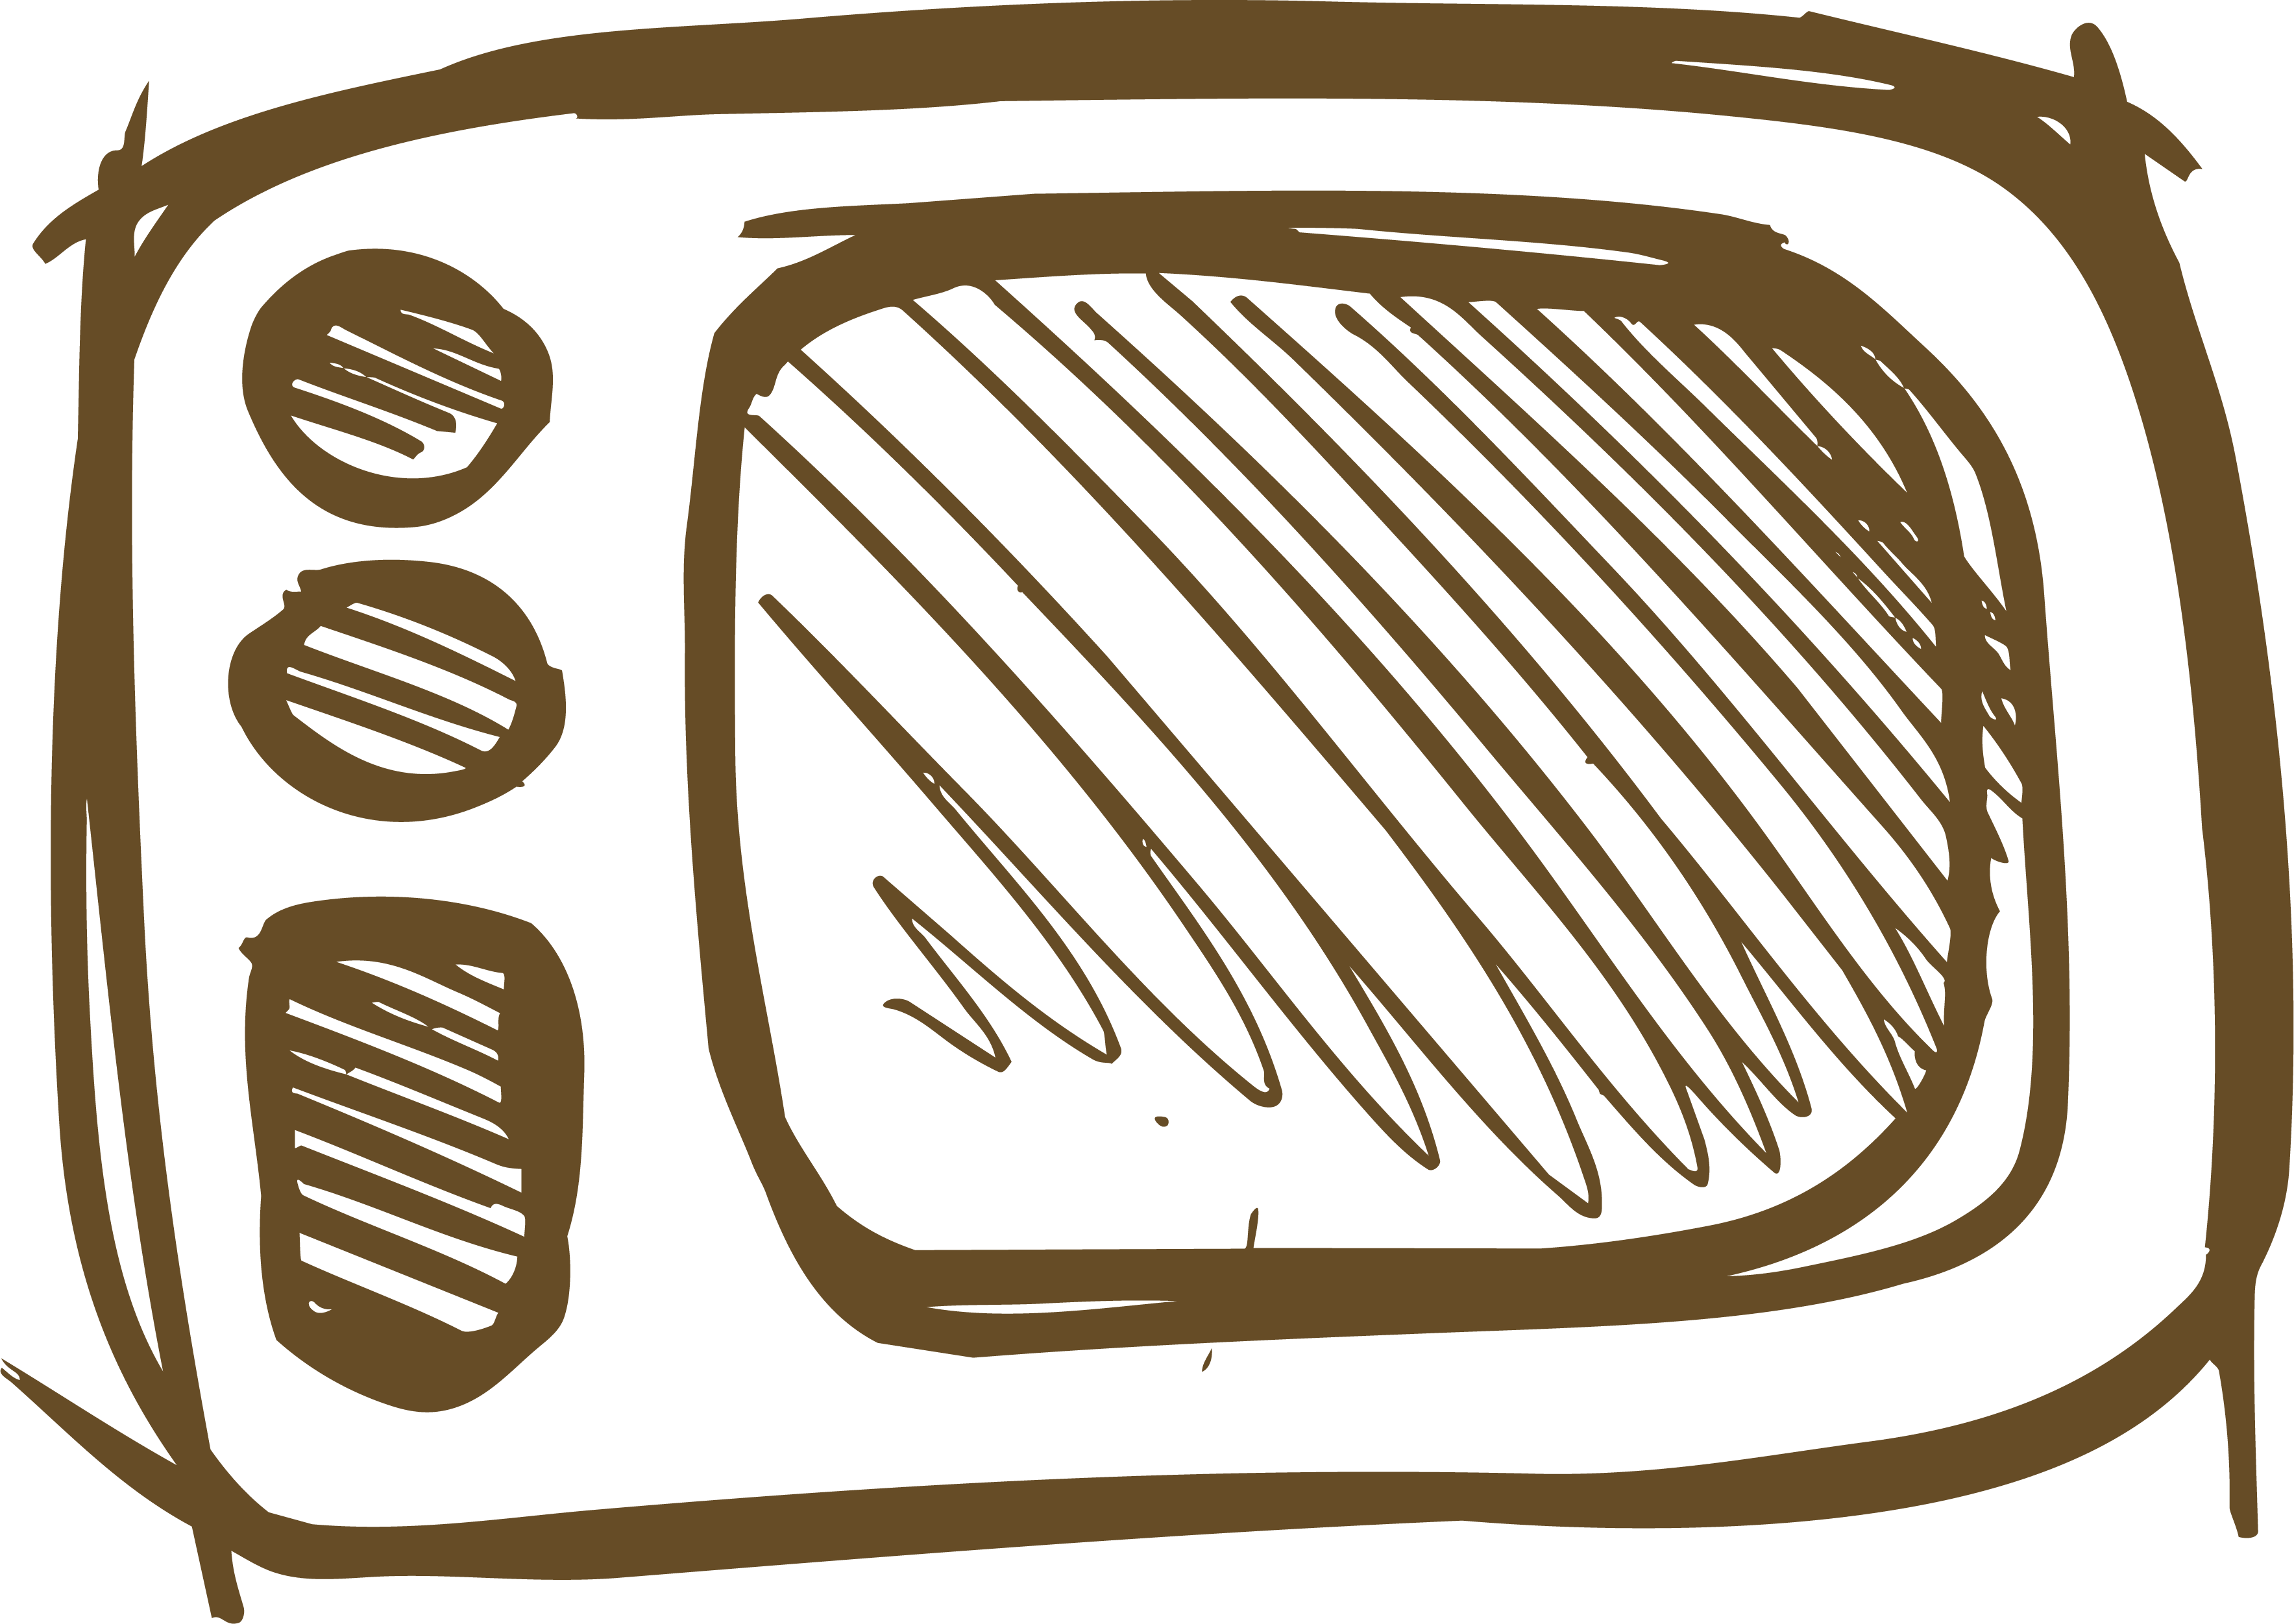 Microwave Oven Clip Art - Microwave Oven (3535x2503)